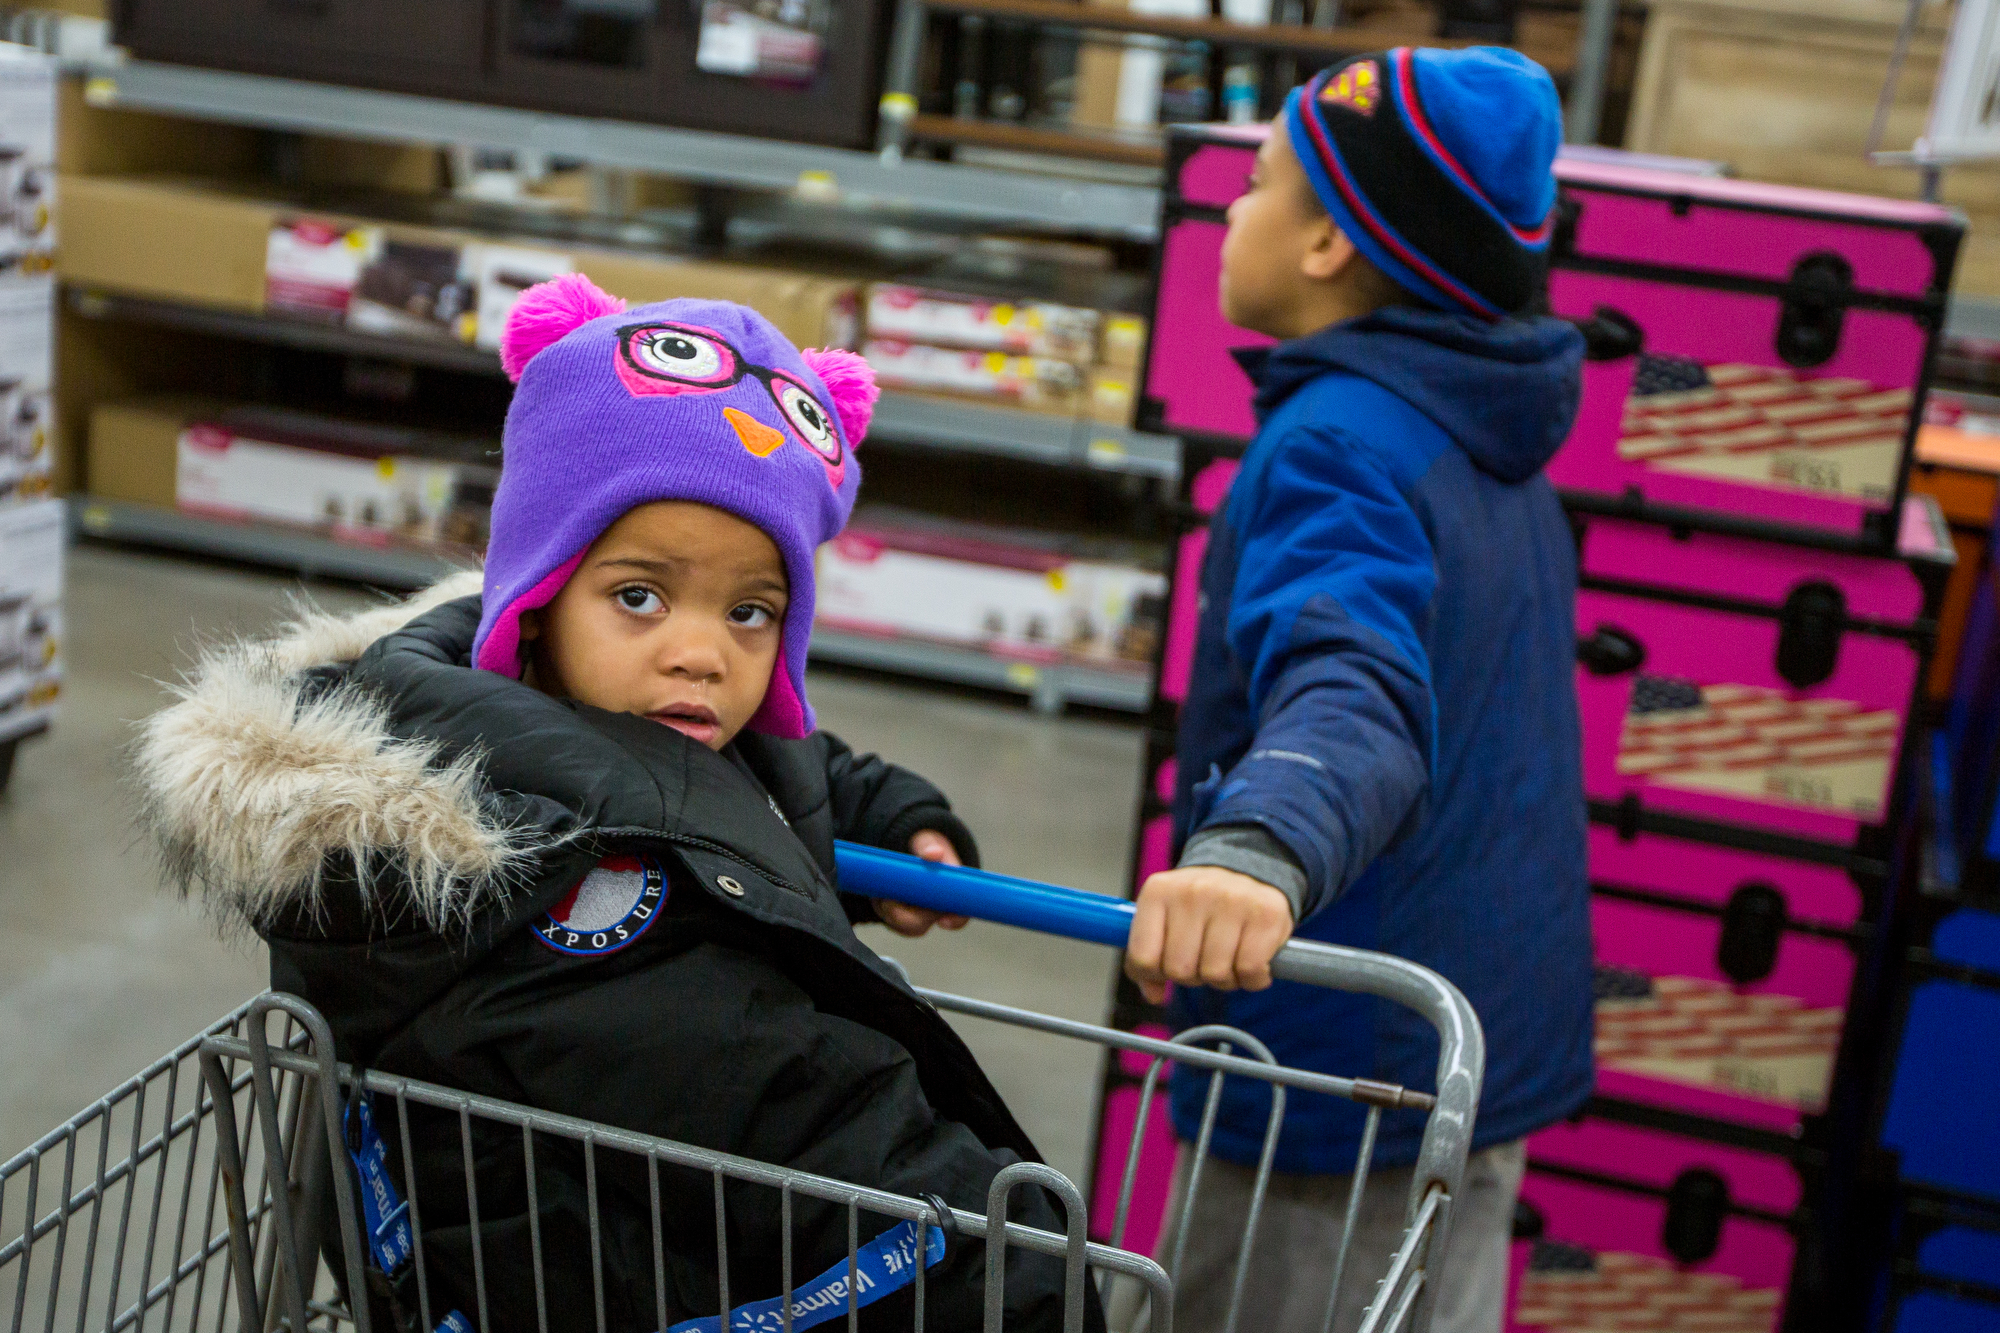  Ta'Nya Phelan, 3, right, sits in  shopping cart while her brother, Juwone Phelan, 12, pushes her while at a shopping trip sponsored by the Warm the Children fund at Walmart in Saline on Friday, December 23, 2016. The Warm the Children fund gathers d